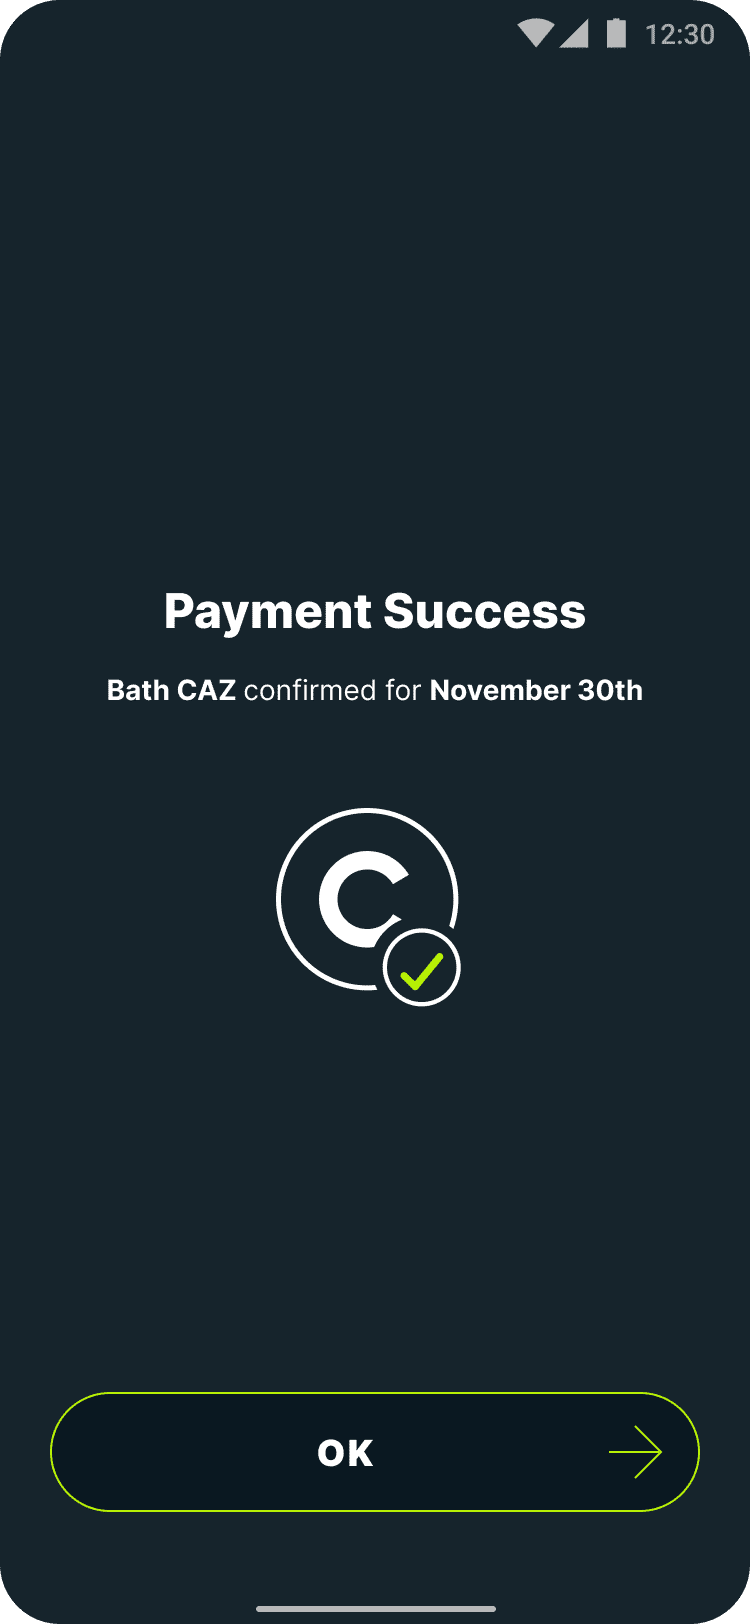 Caura app screen showing successful payment of the Bath CAZ charge